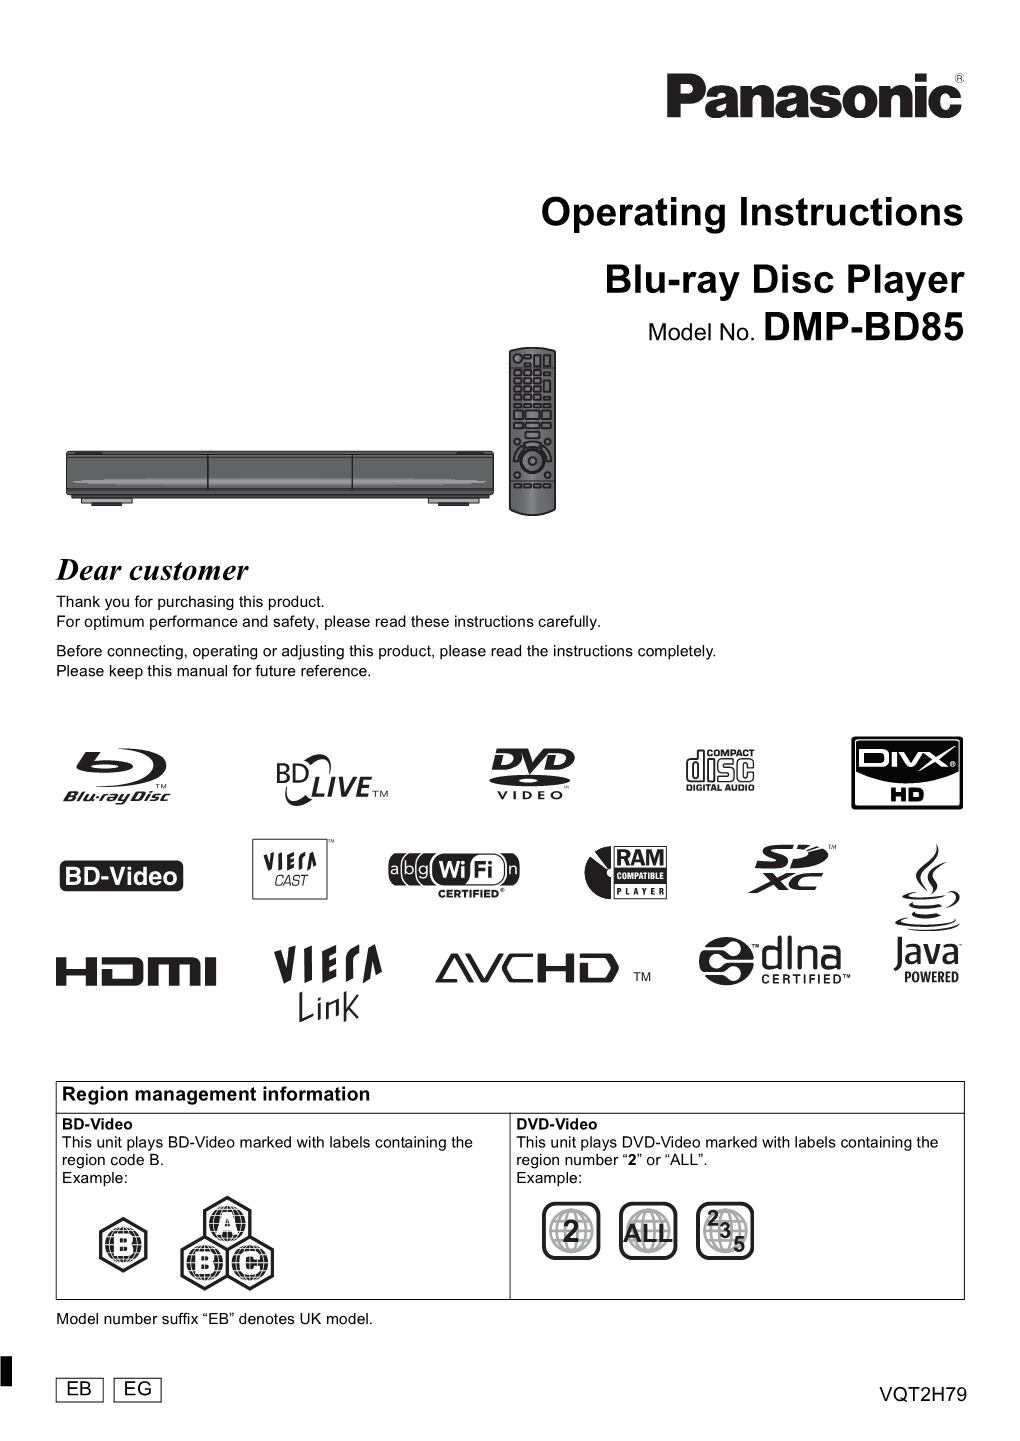 Operating Instructions Blu-Ray Disc Player Model No